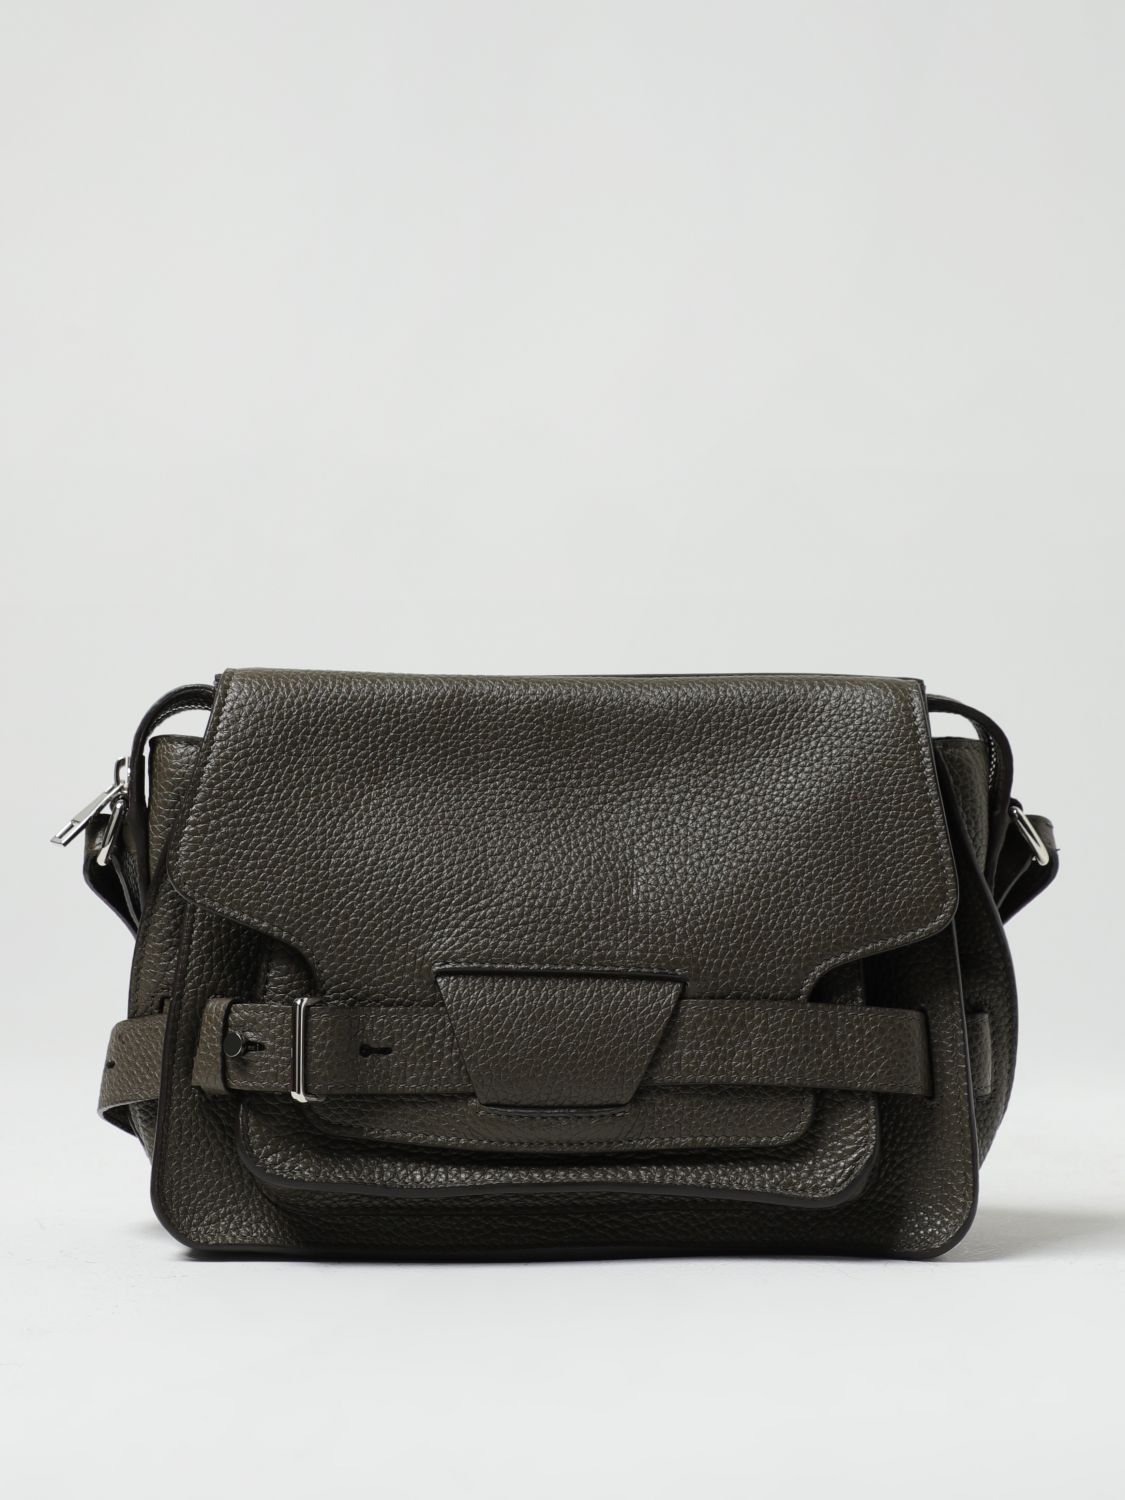 Shop Proenza Schouler Beacon Bag In Grained Leather In Olive